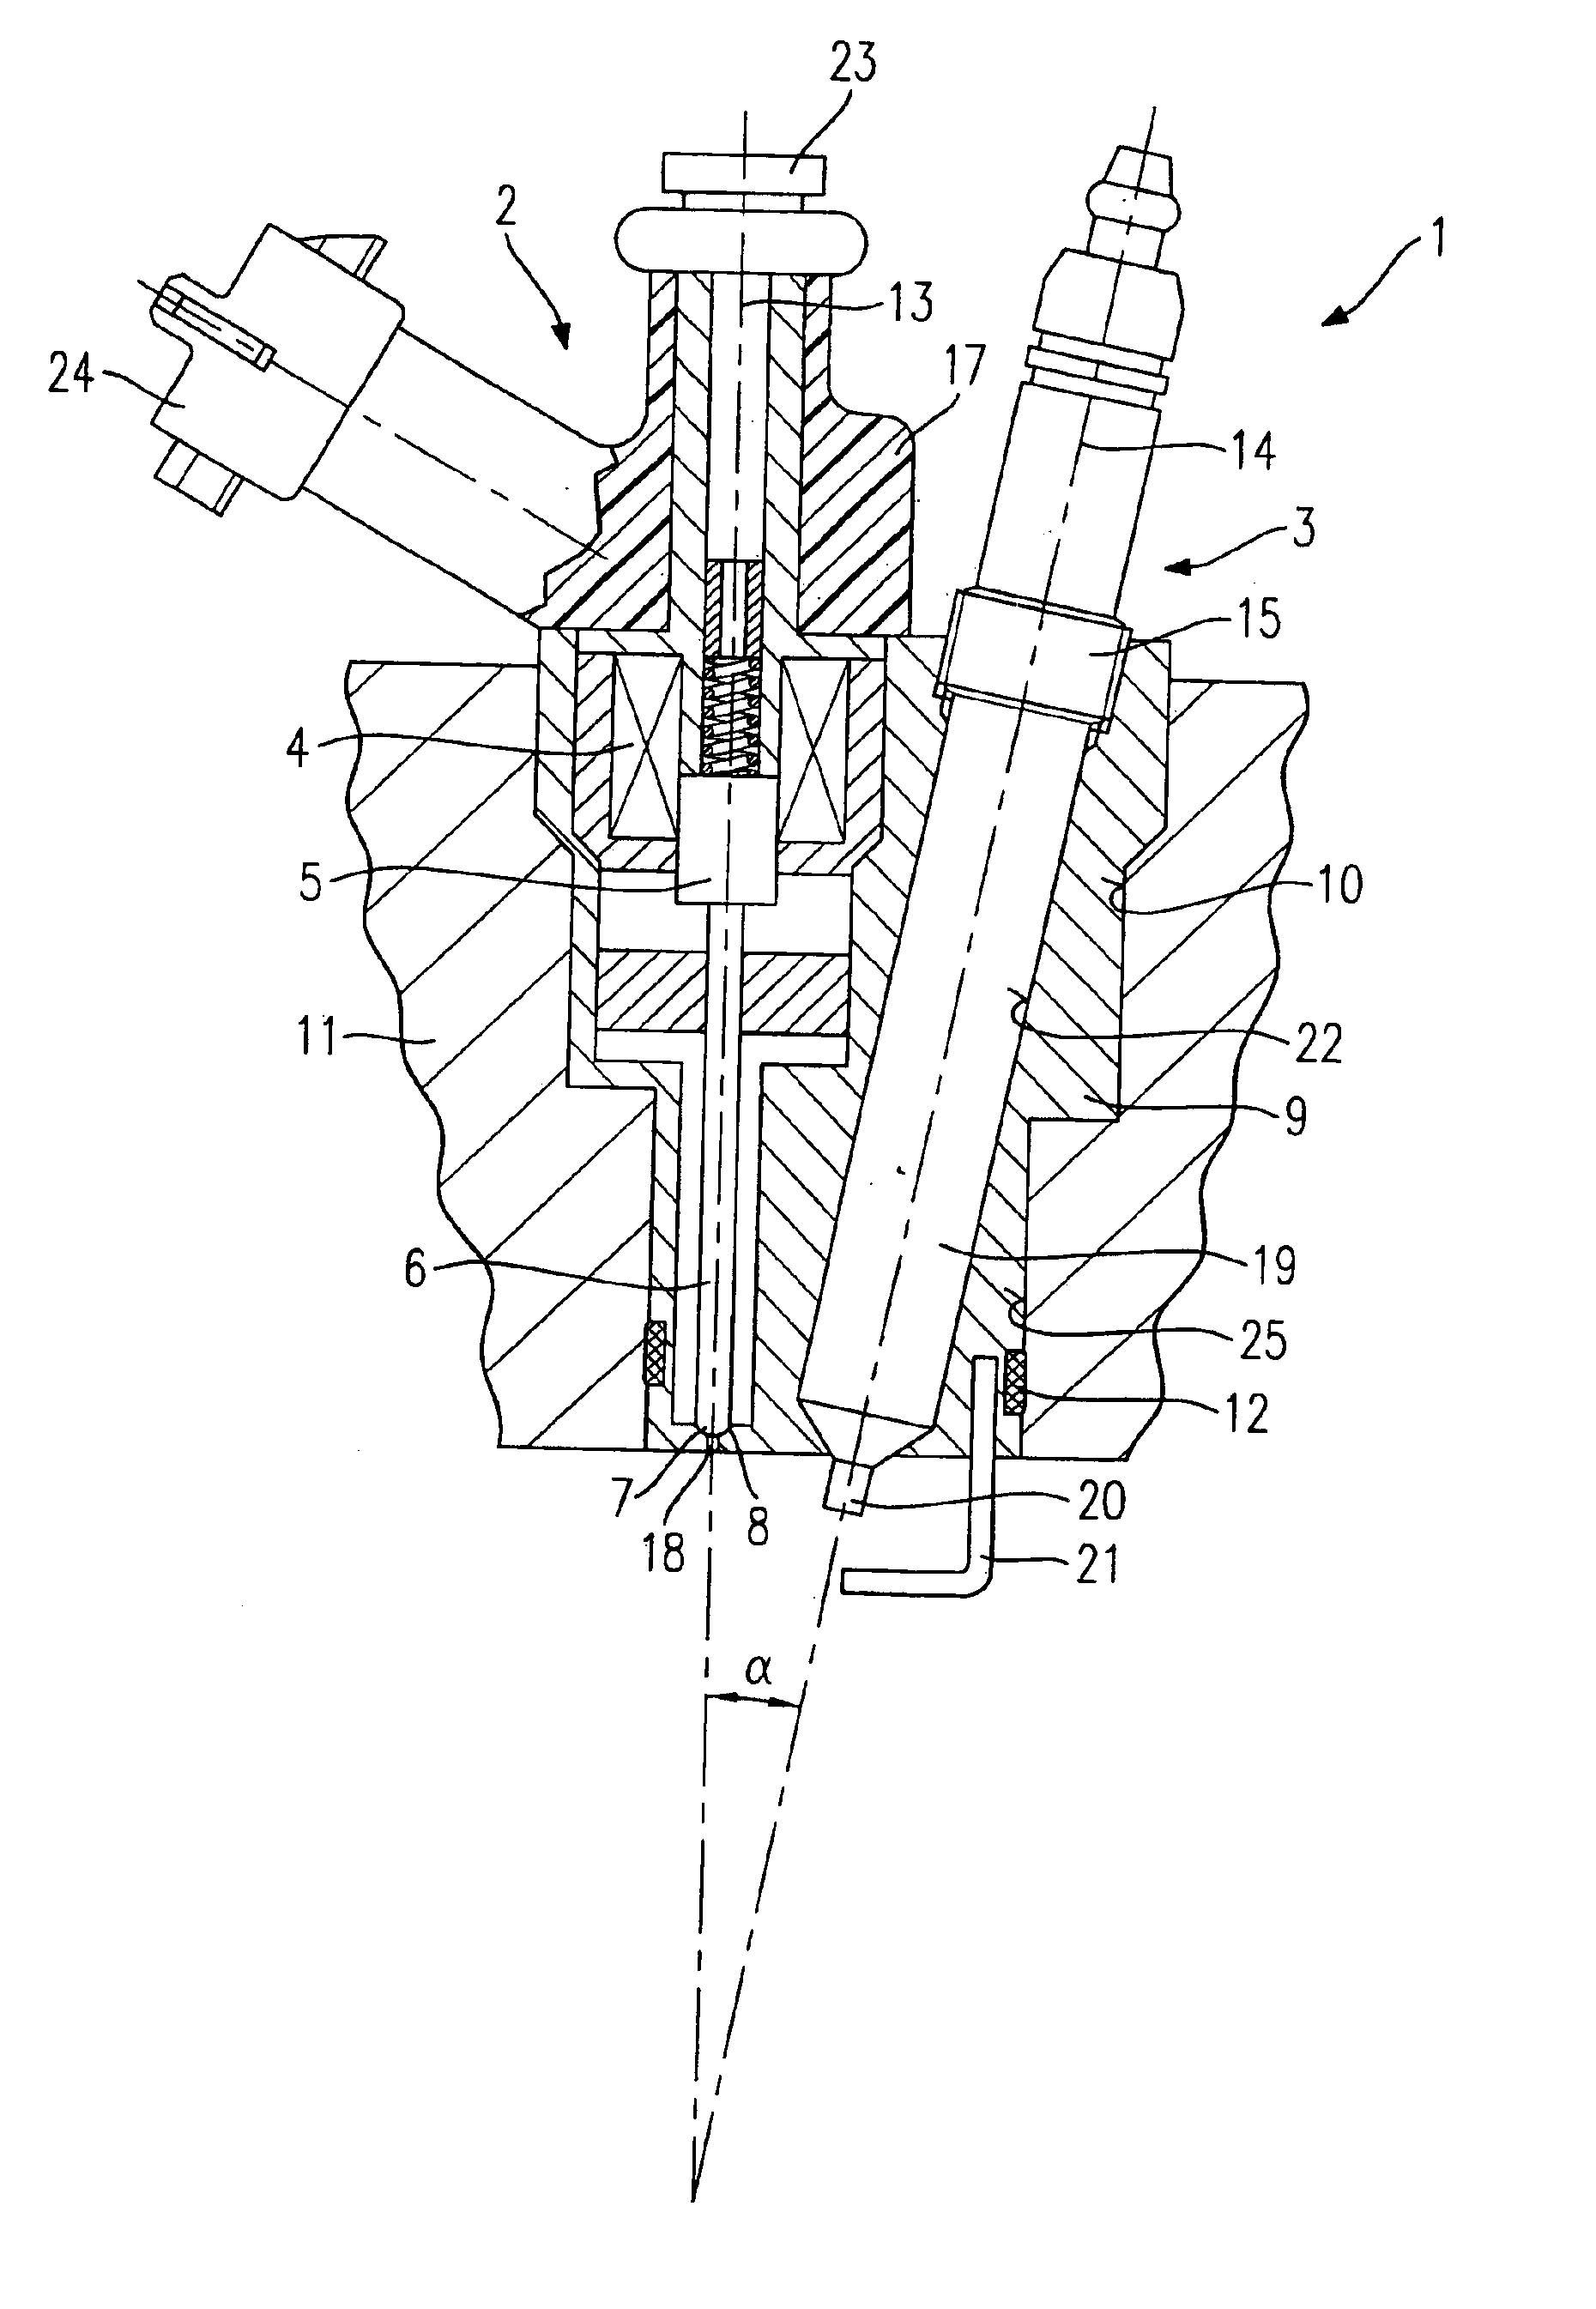 Combined fuel injection valve/ignition plug